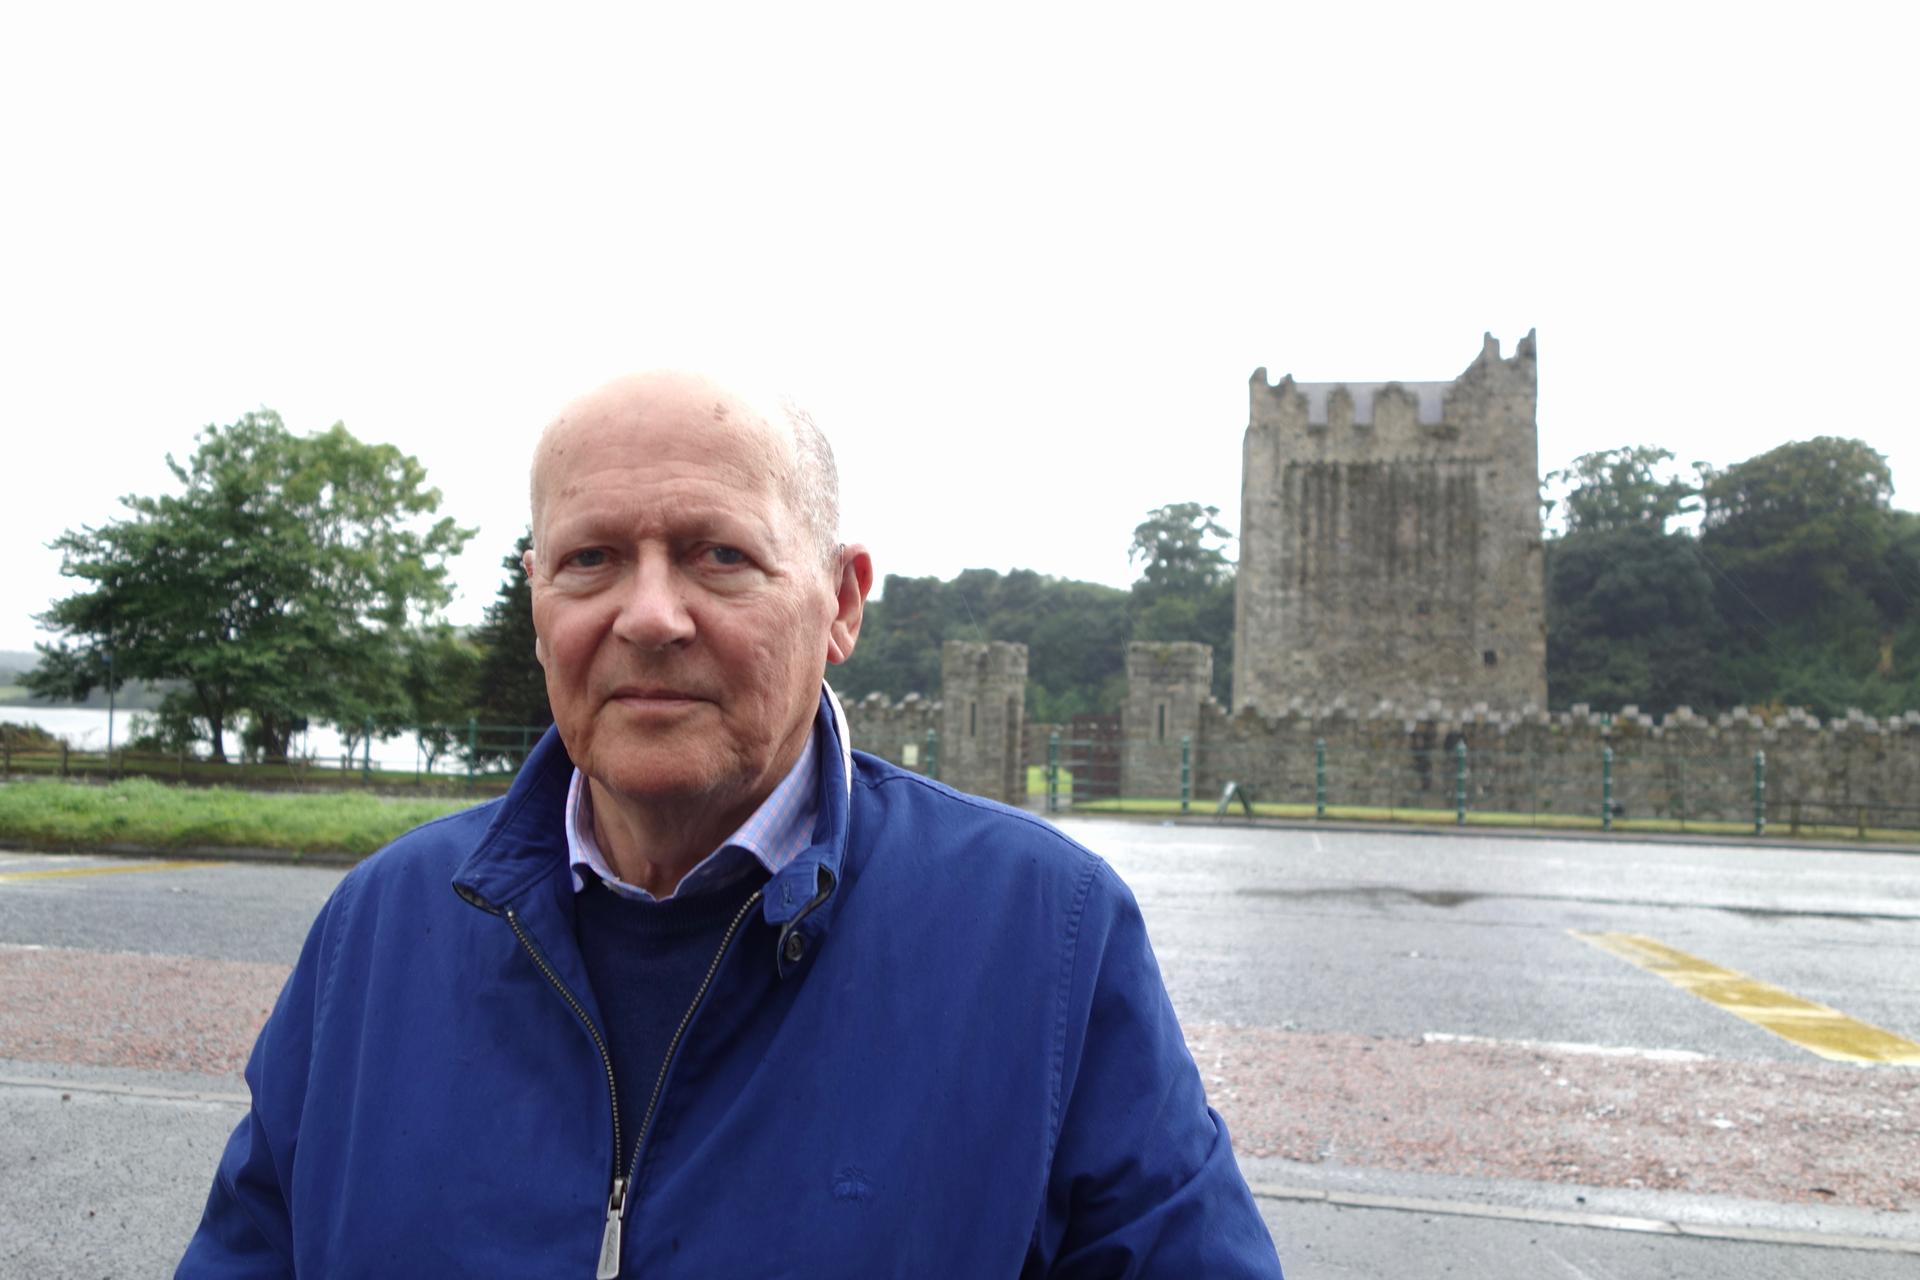 Irish journalist and author Conor O'Clery, standing at Narrow Water Castle, in Newry, County Down, Northern Ireland